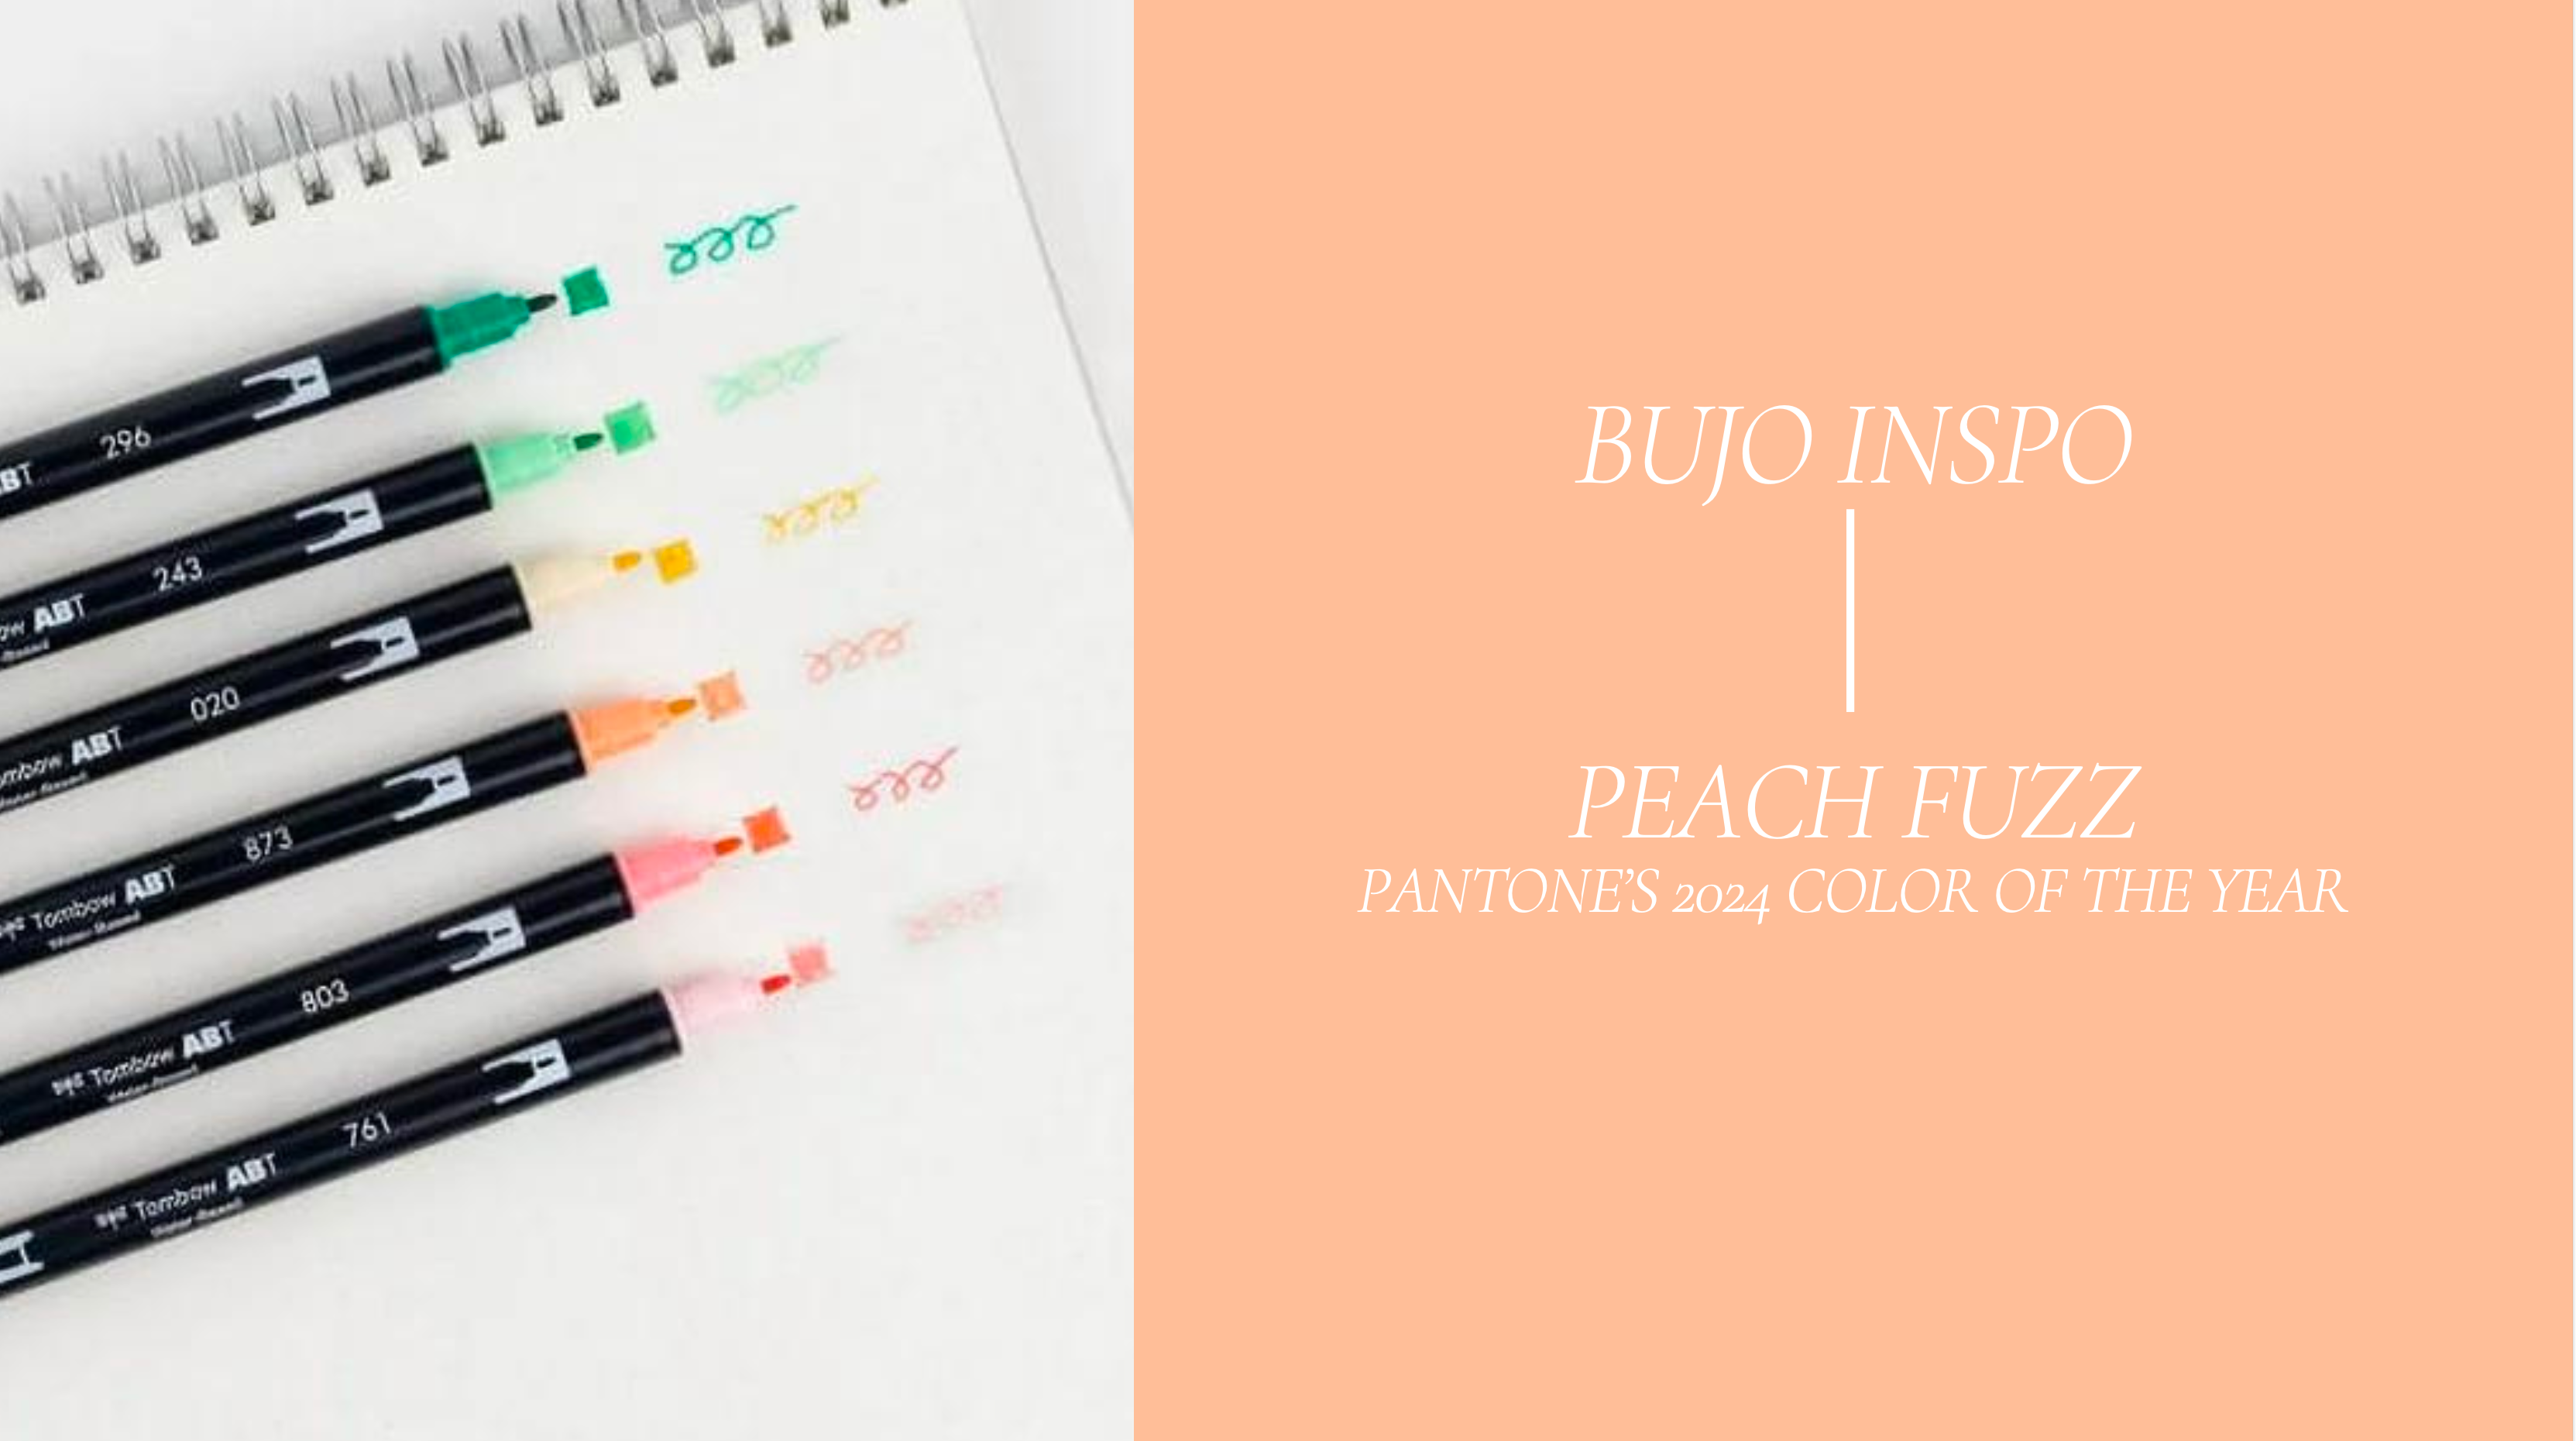 Pantone 2024 Color of the year... Peach Fuzz!